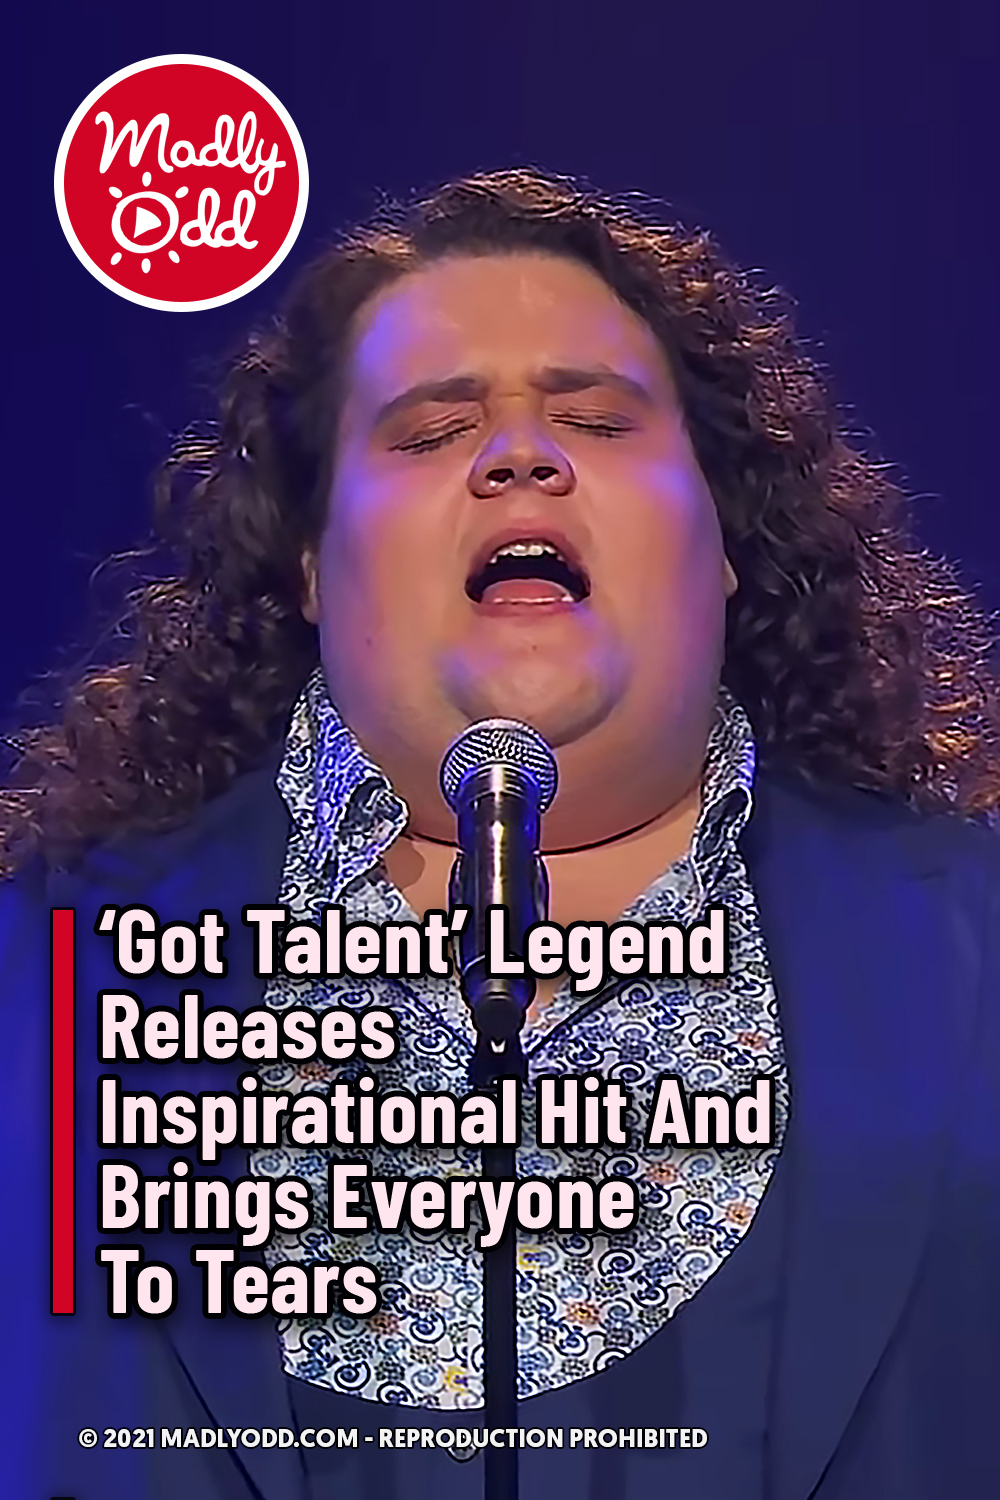 \'Got Talent\' Legend Releases Inspirational Hit And Brings Everyone To Tears